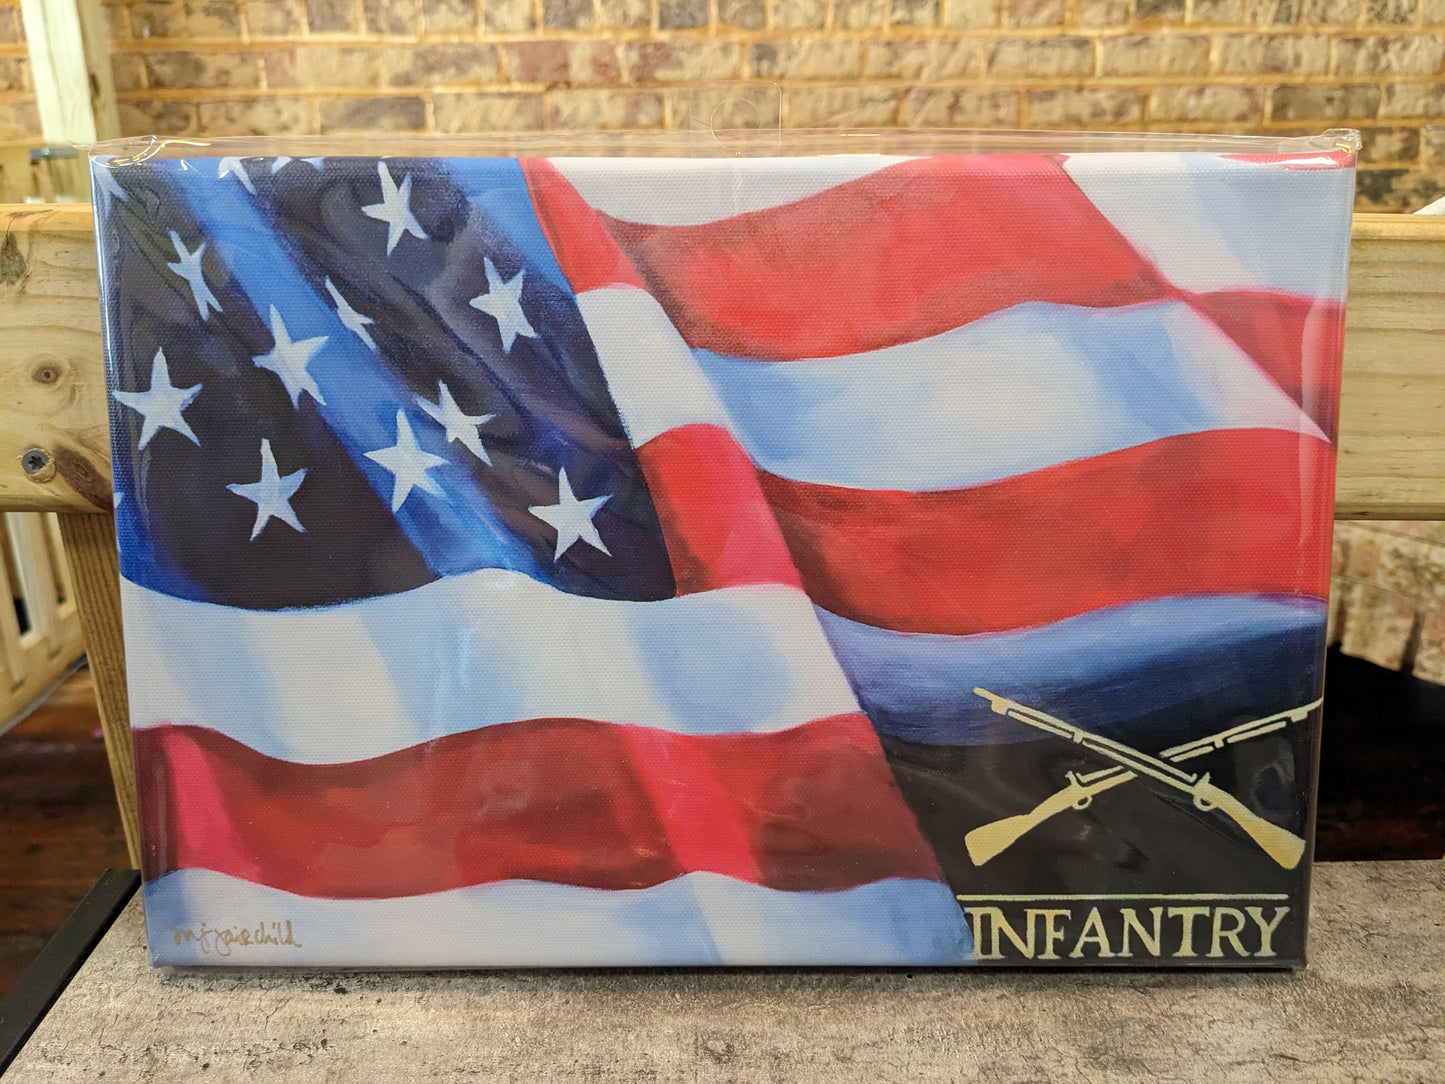 8"x12" Signed Canvas Print: Infantry